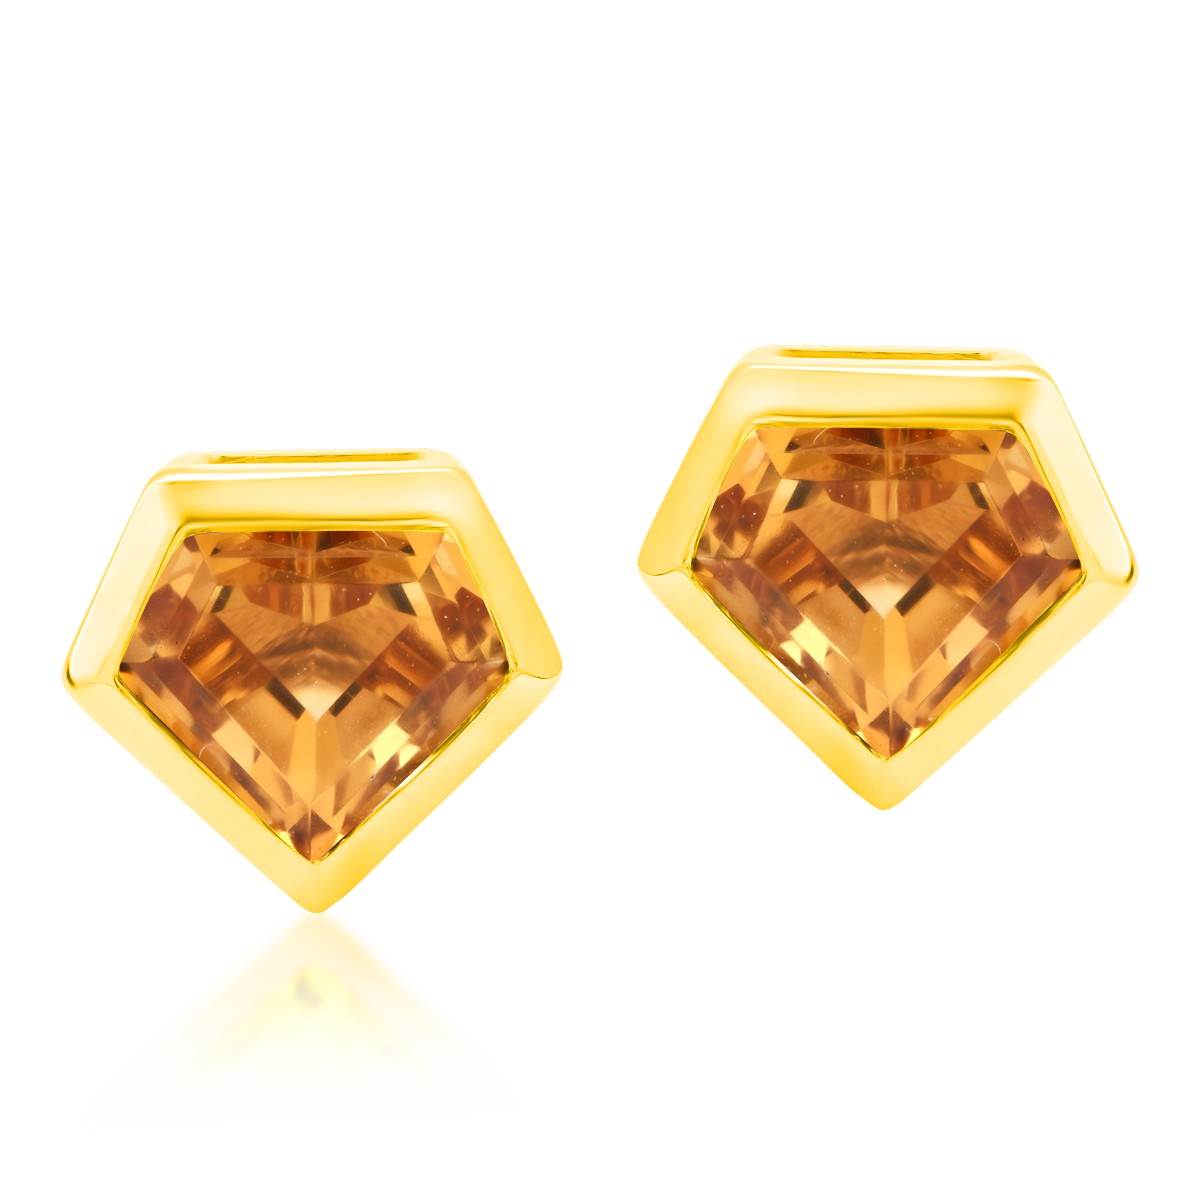 18K yellow gold earrings with 1.084ct citrine